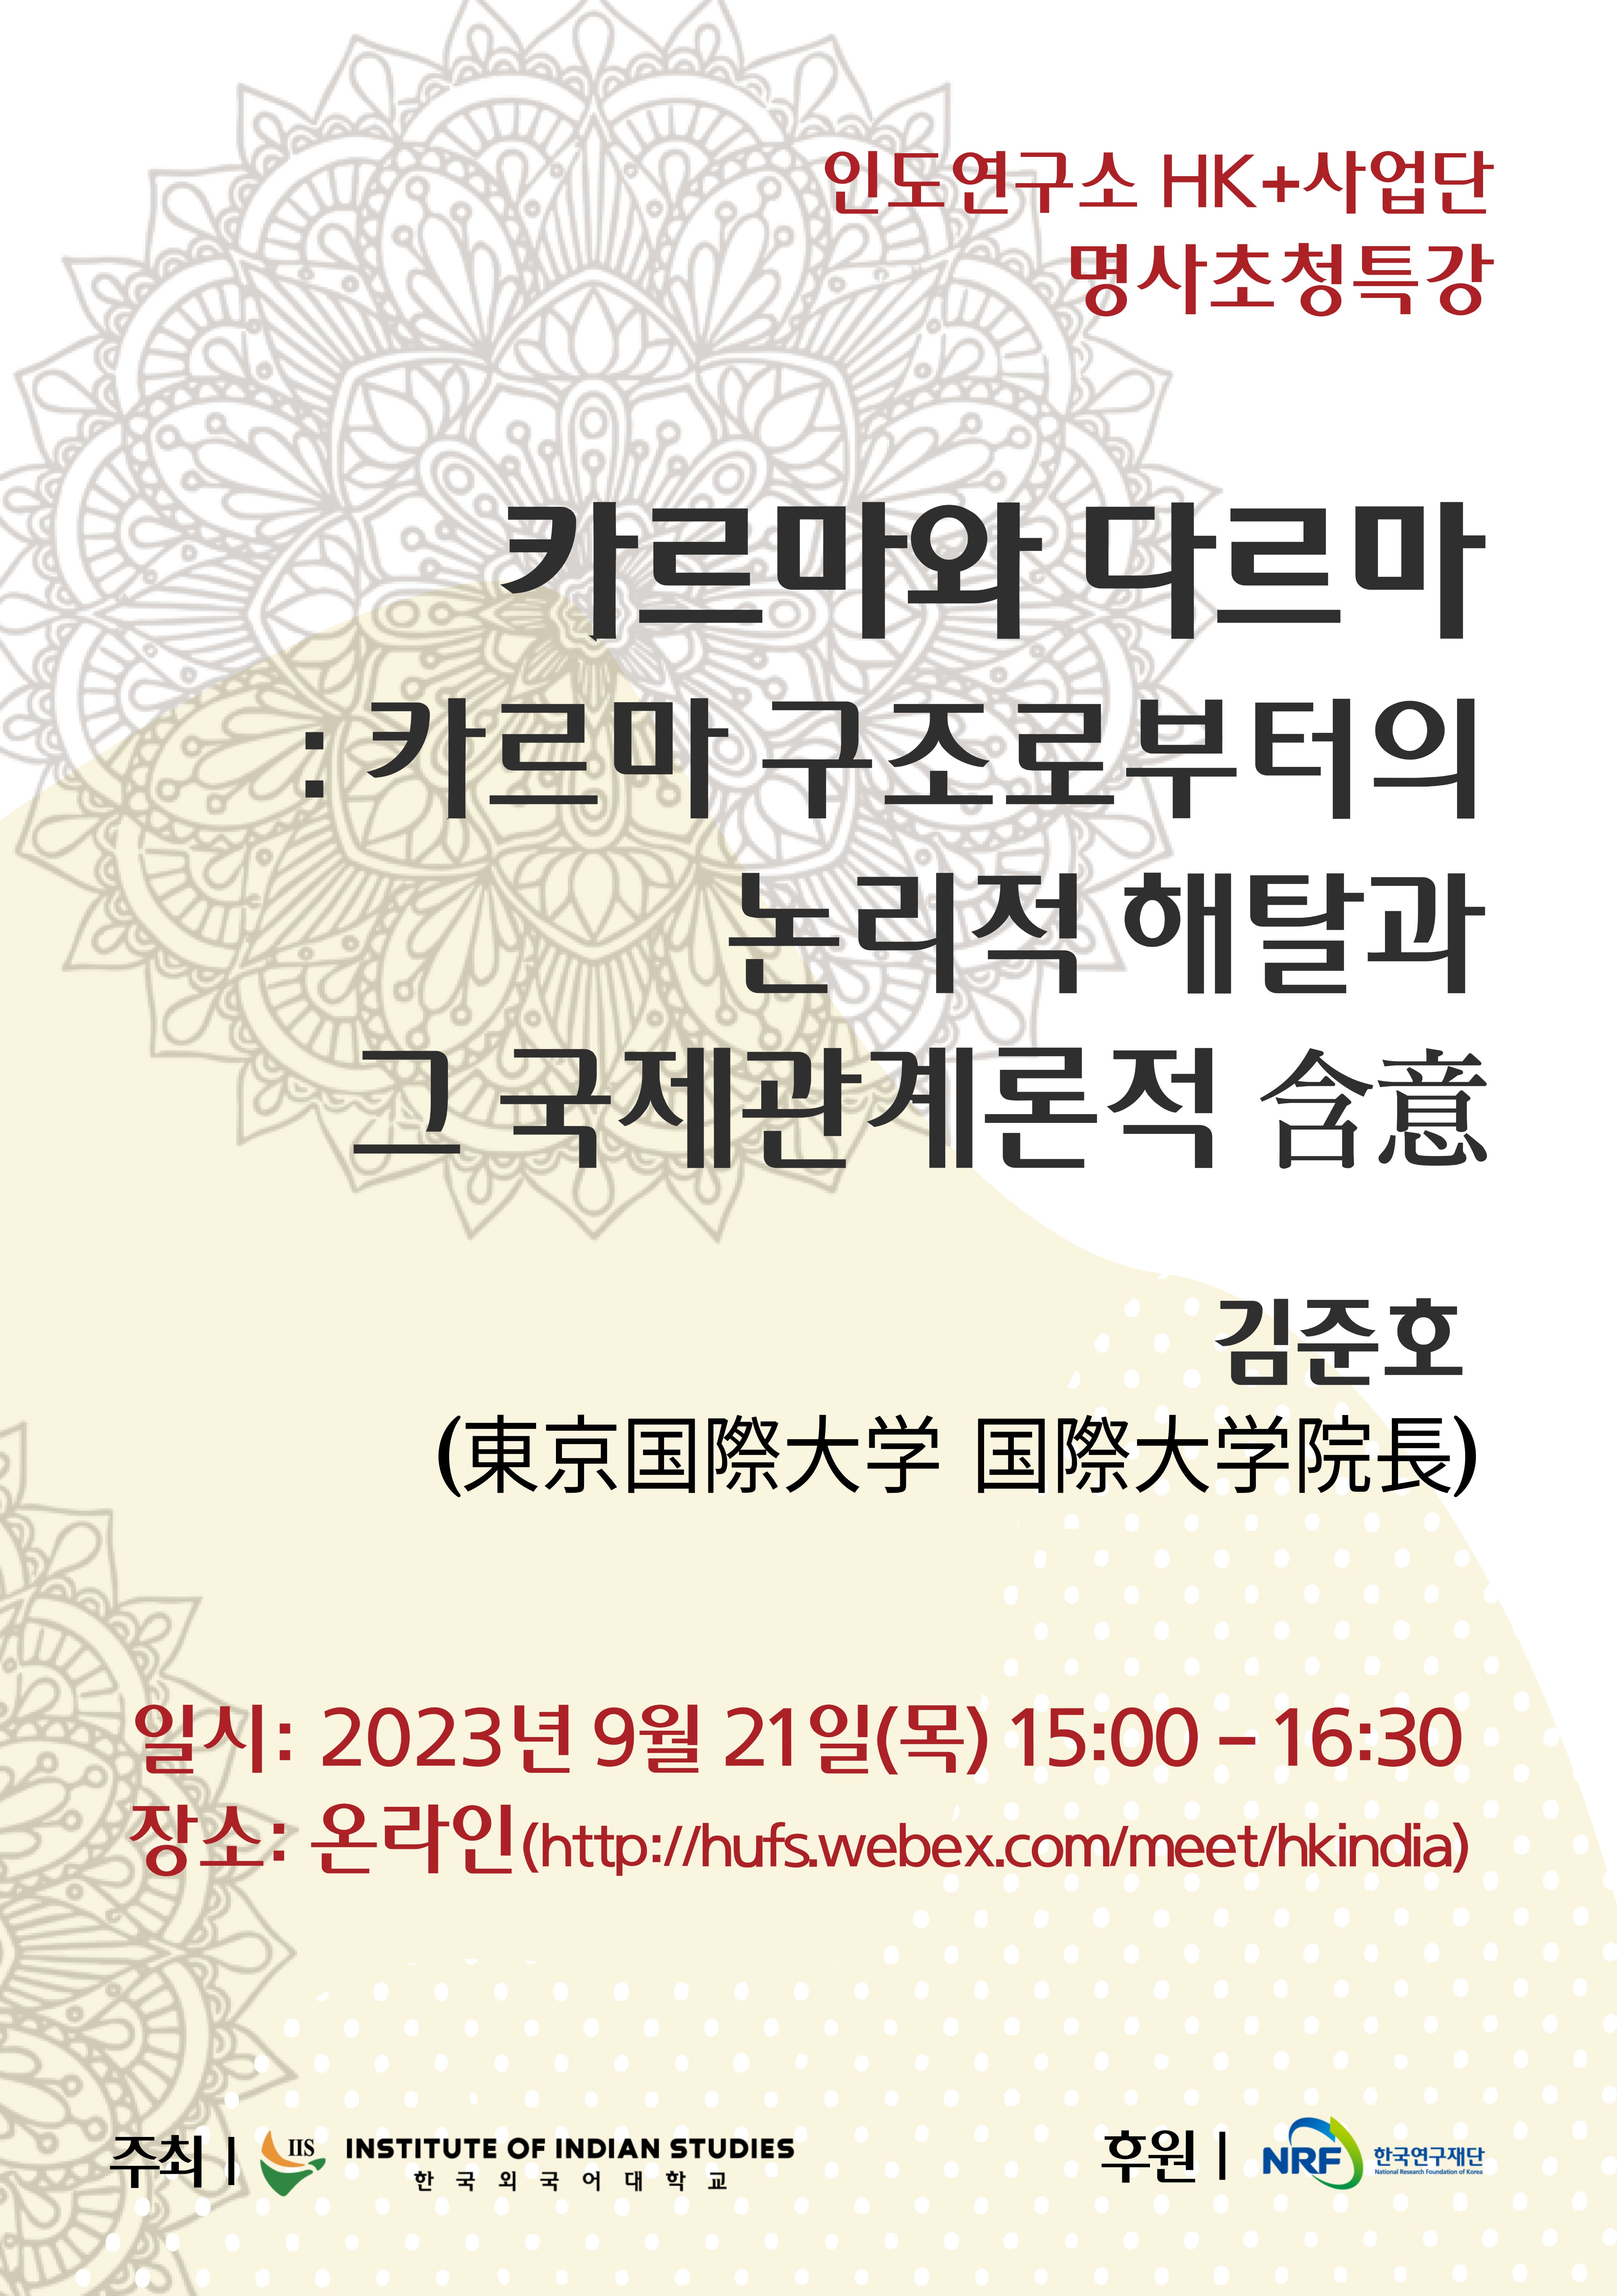 The 62nd Special Lecture 대표이미지